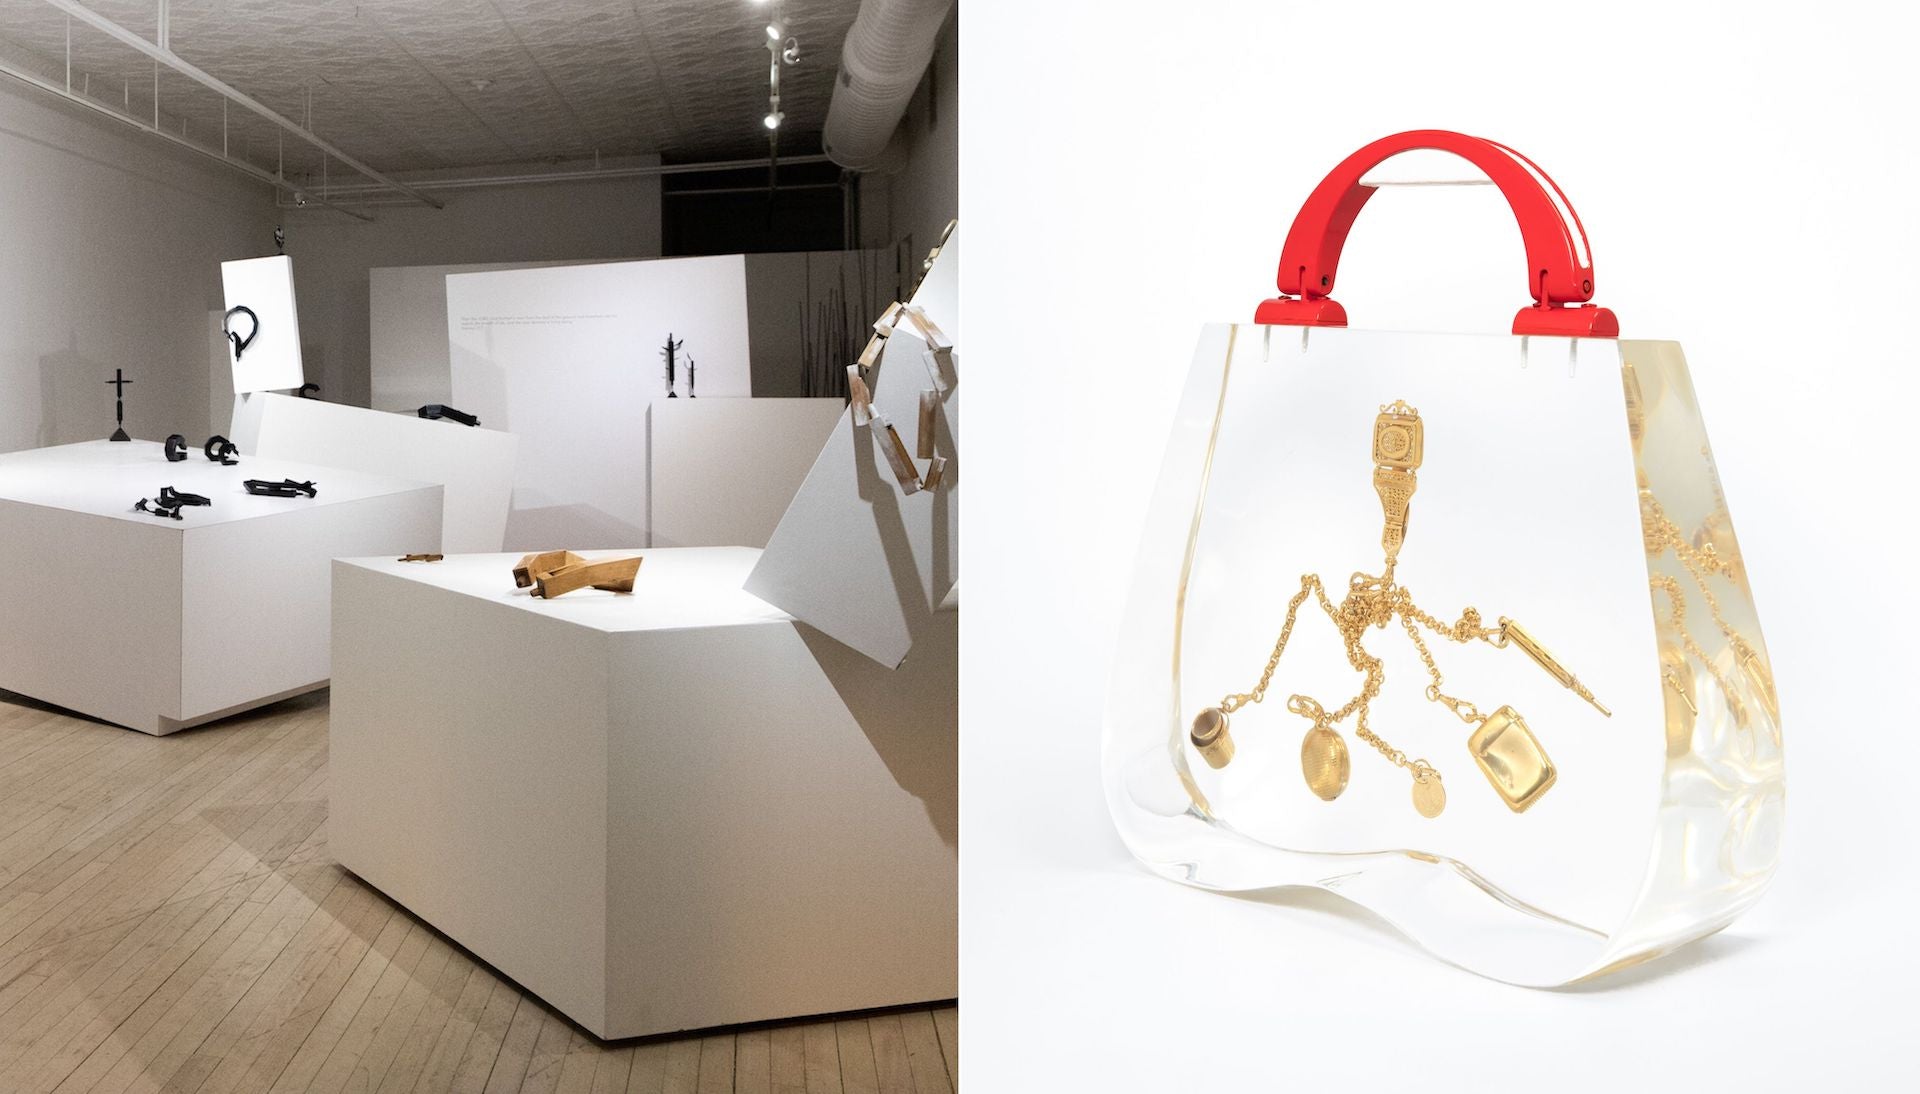 Tanel Veenre: BeforeAfter at Ornamentum in Hudson. Red Loves Gold Chatelaine Bag by Ted Noten for Ornamentum (2022). Photos © Ornamentum